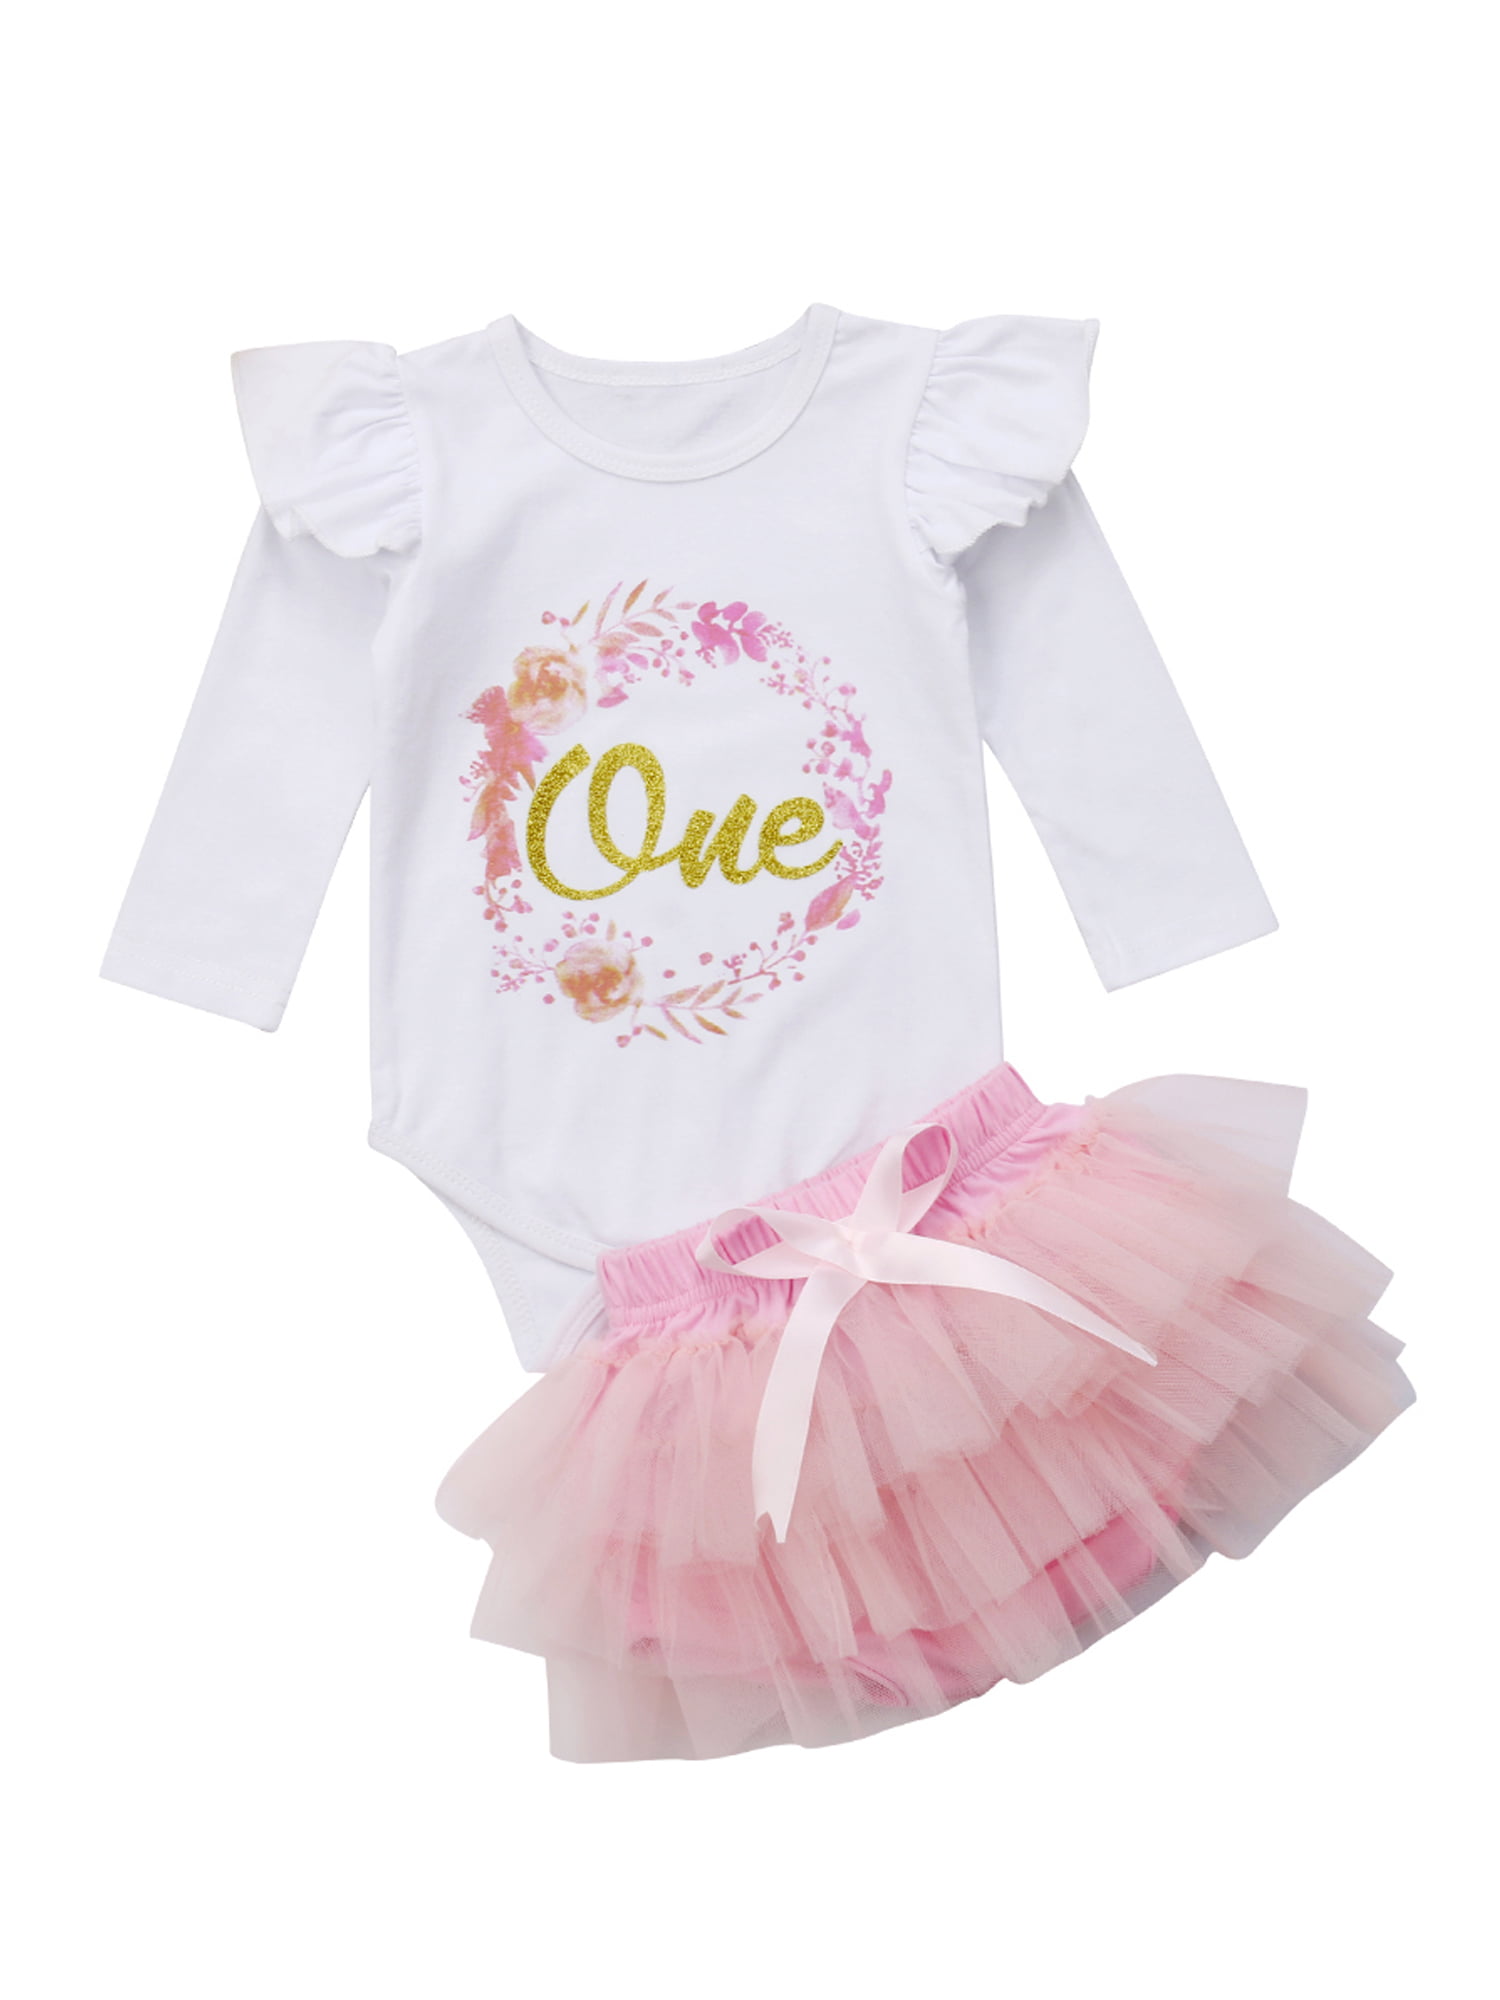 Cute Newborn Baby Girl 1st Birthday Party Dress Floral Romper Tutu Skirt Clothes 